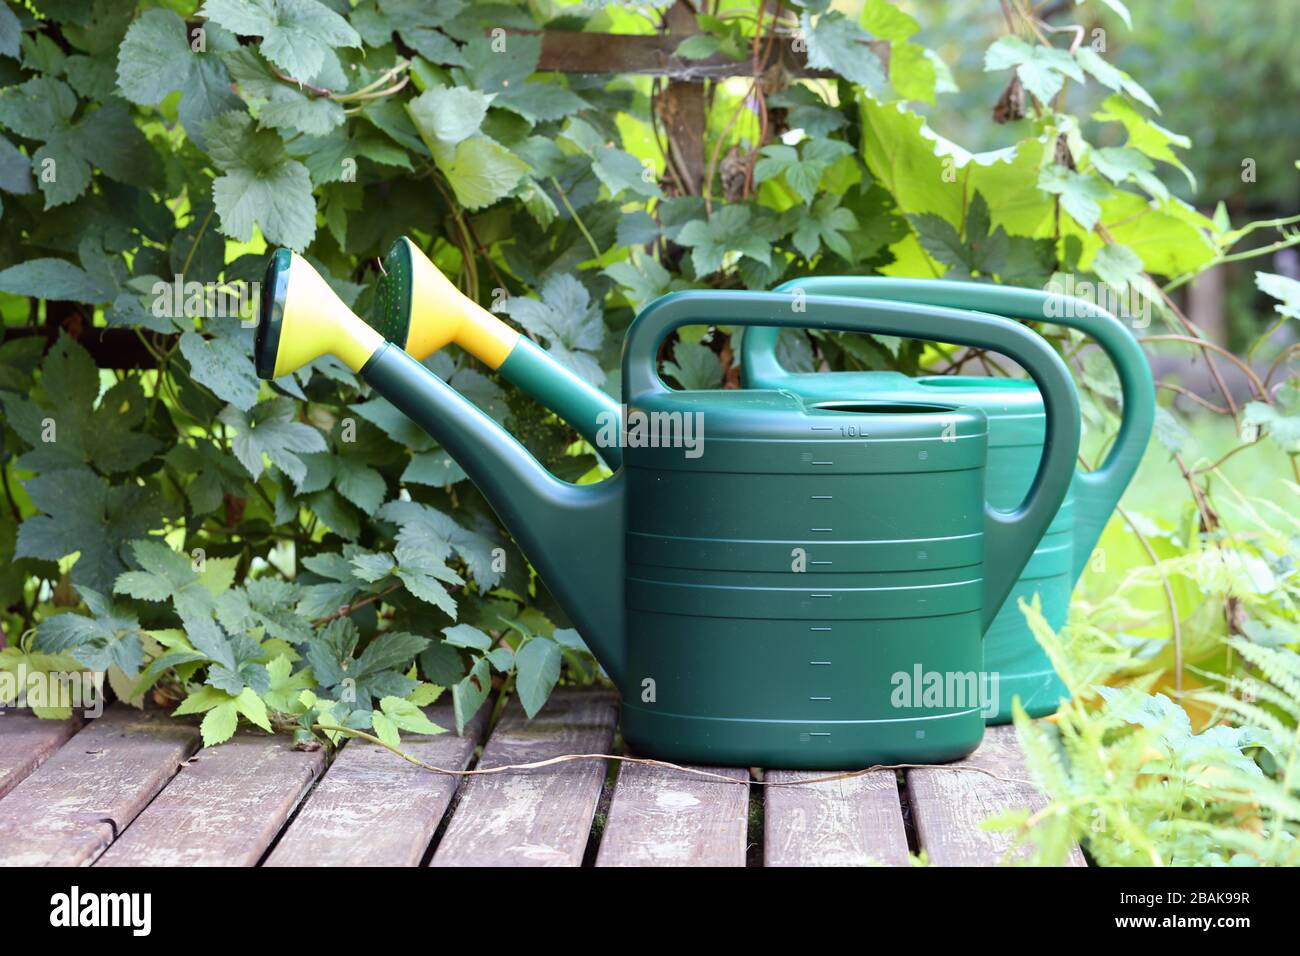 Two big green watering cans on a porch of a summer cottage located in Finland. The porch is brown and wooden, and there is also green leafy plants. Stock Photo